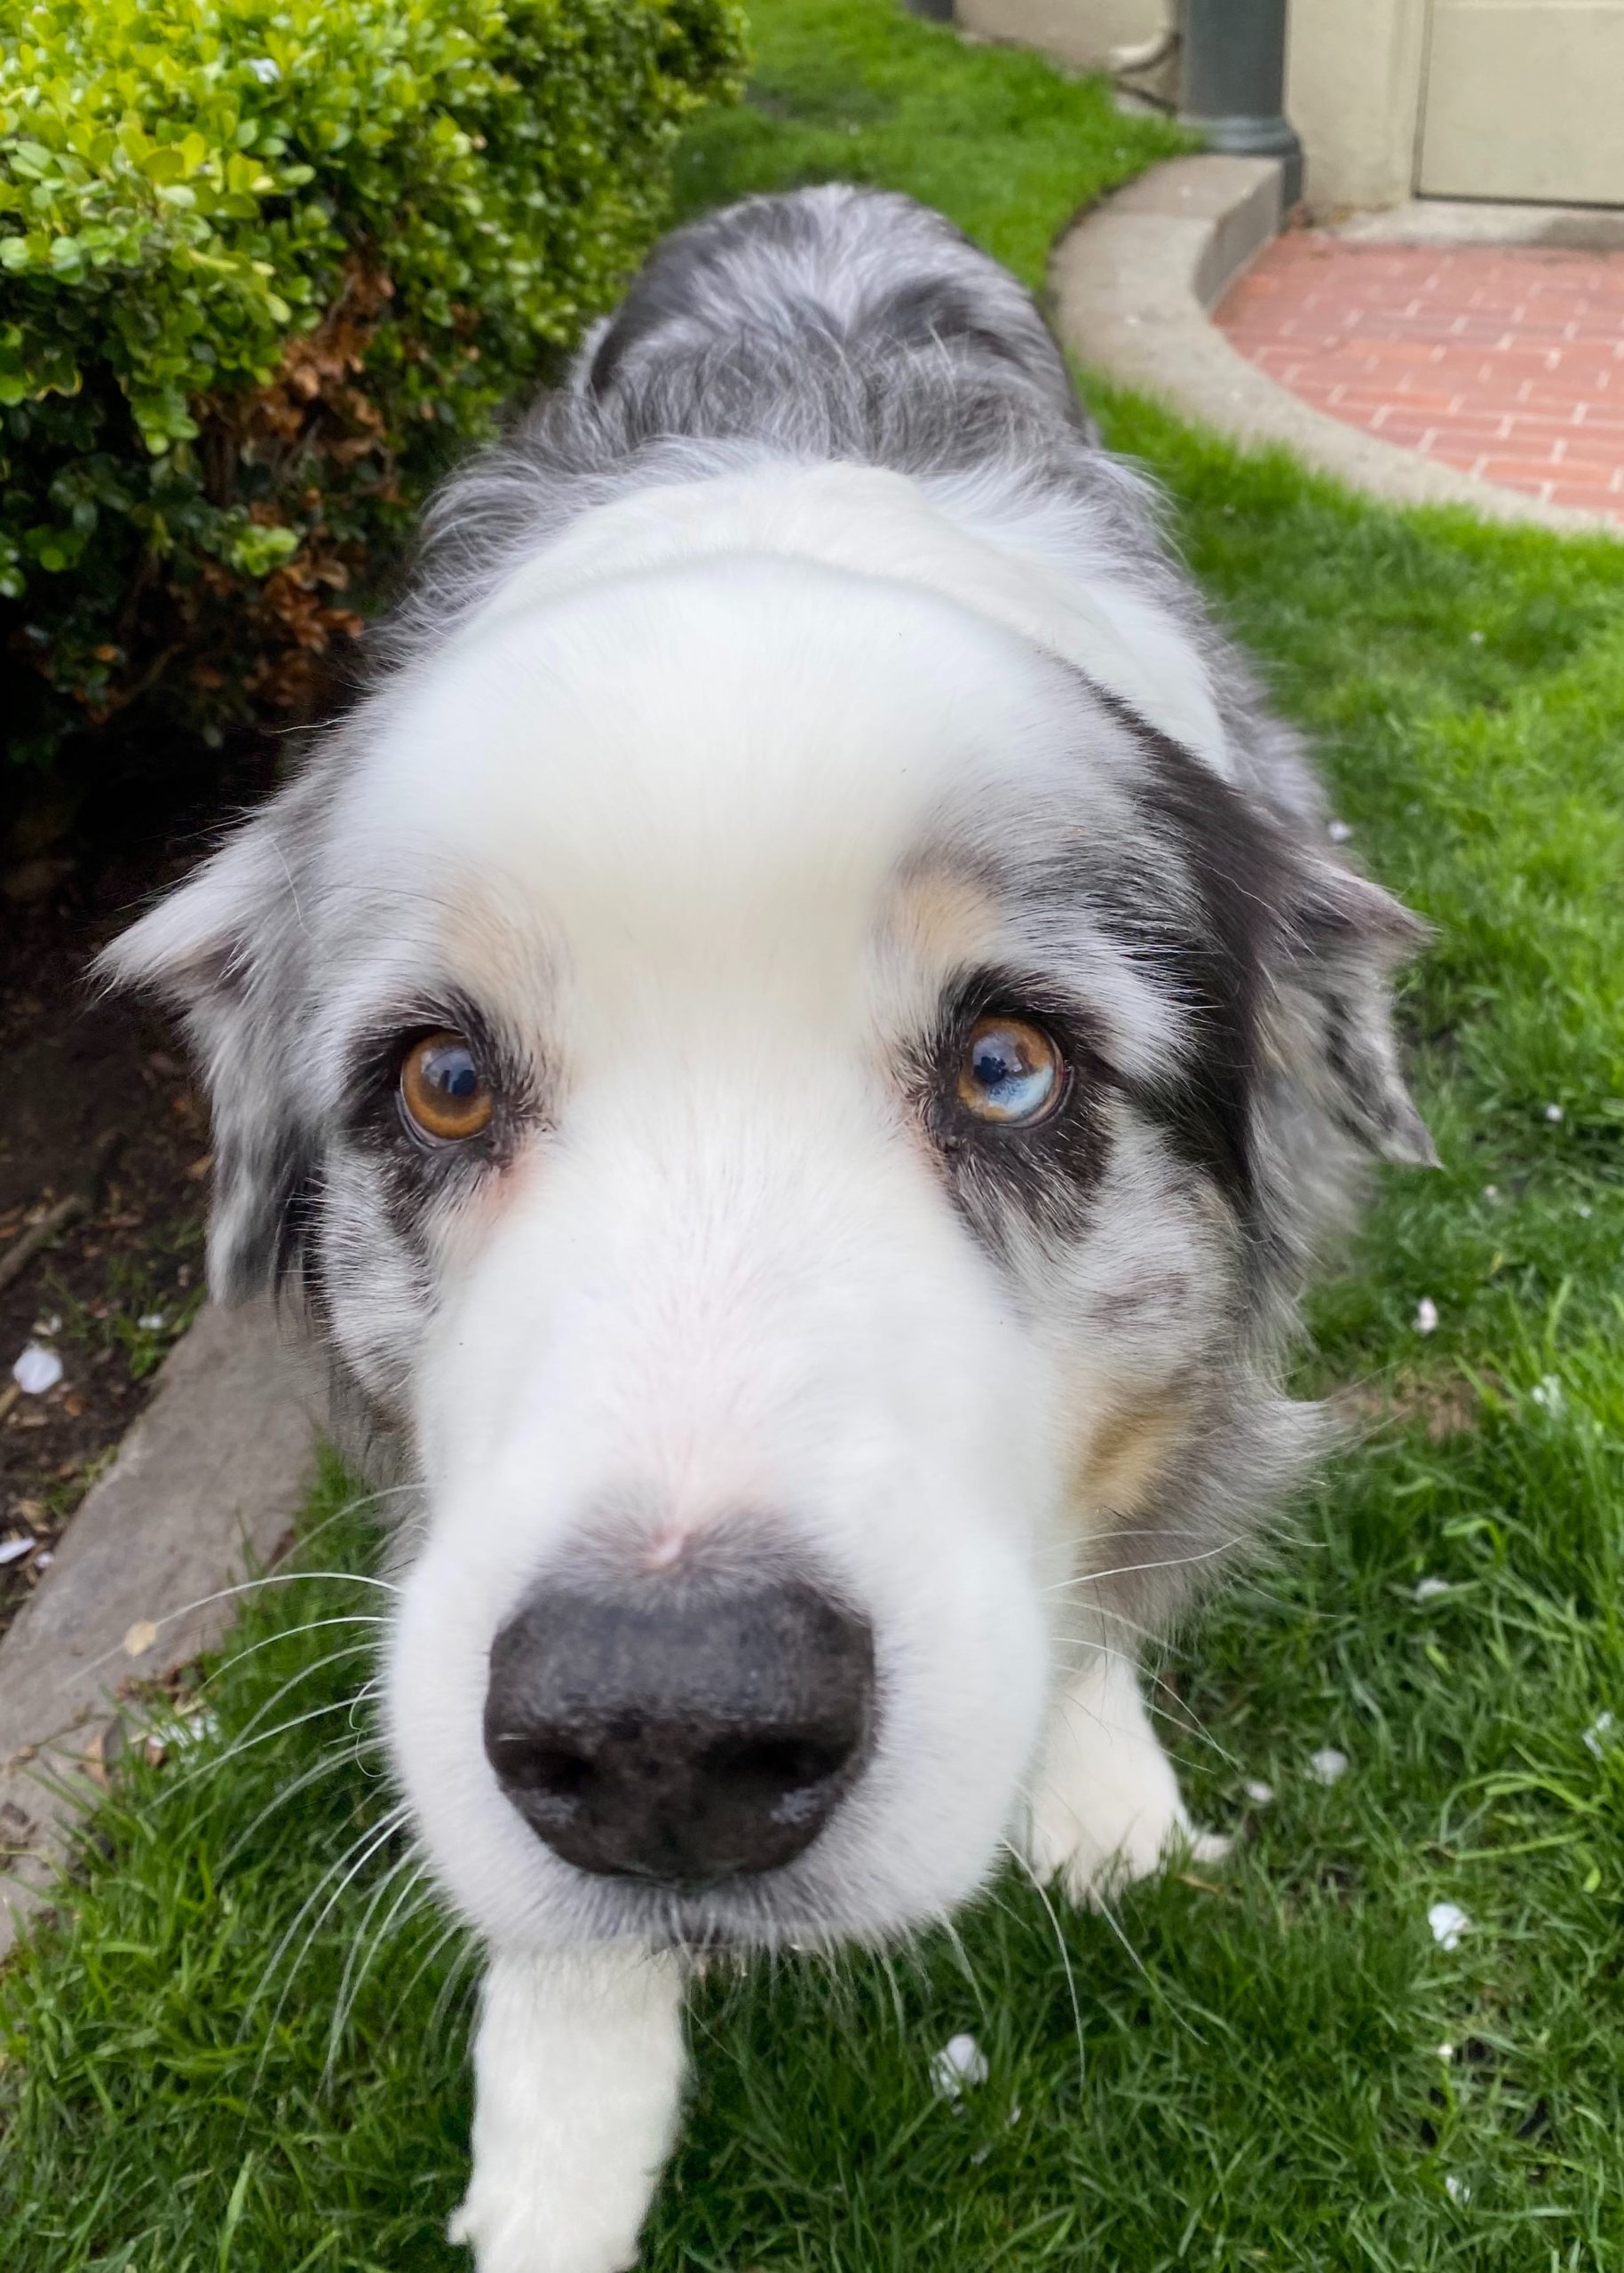 Blue Merle Australian Shepherd With Partial Hererochromia Staring Into The Camera